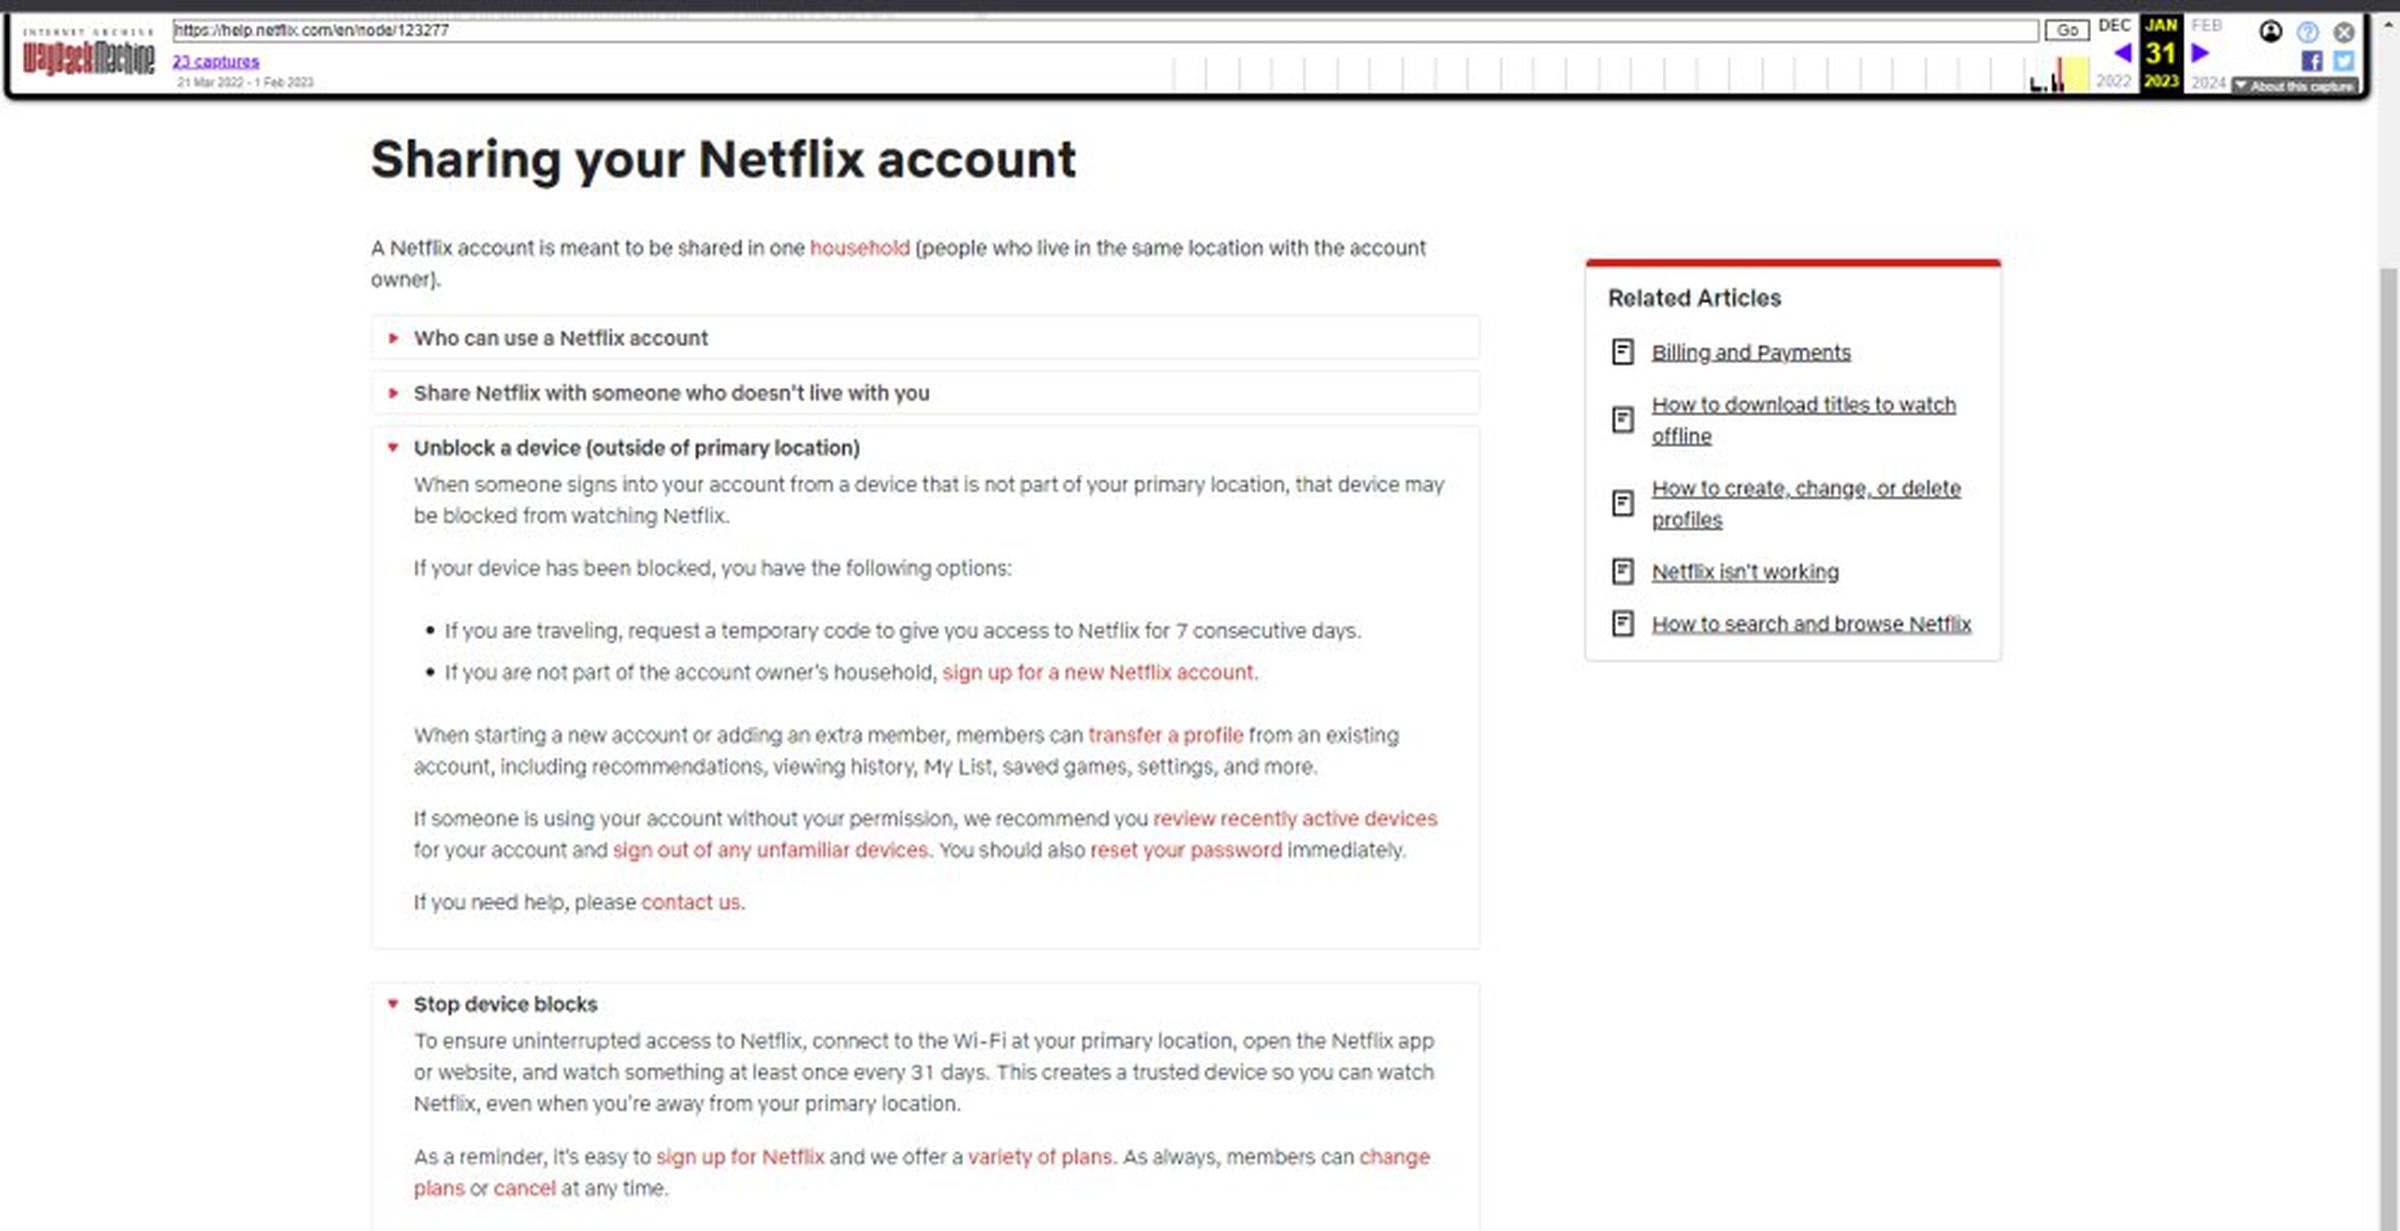 Netflix has not yet confirmed its plans to stop password sharing